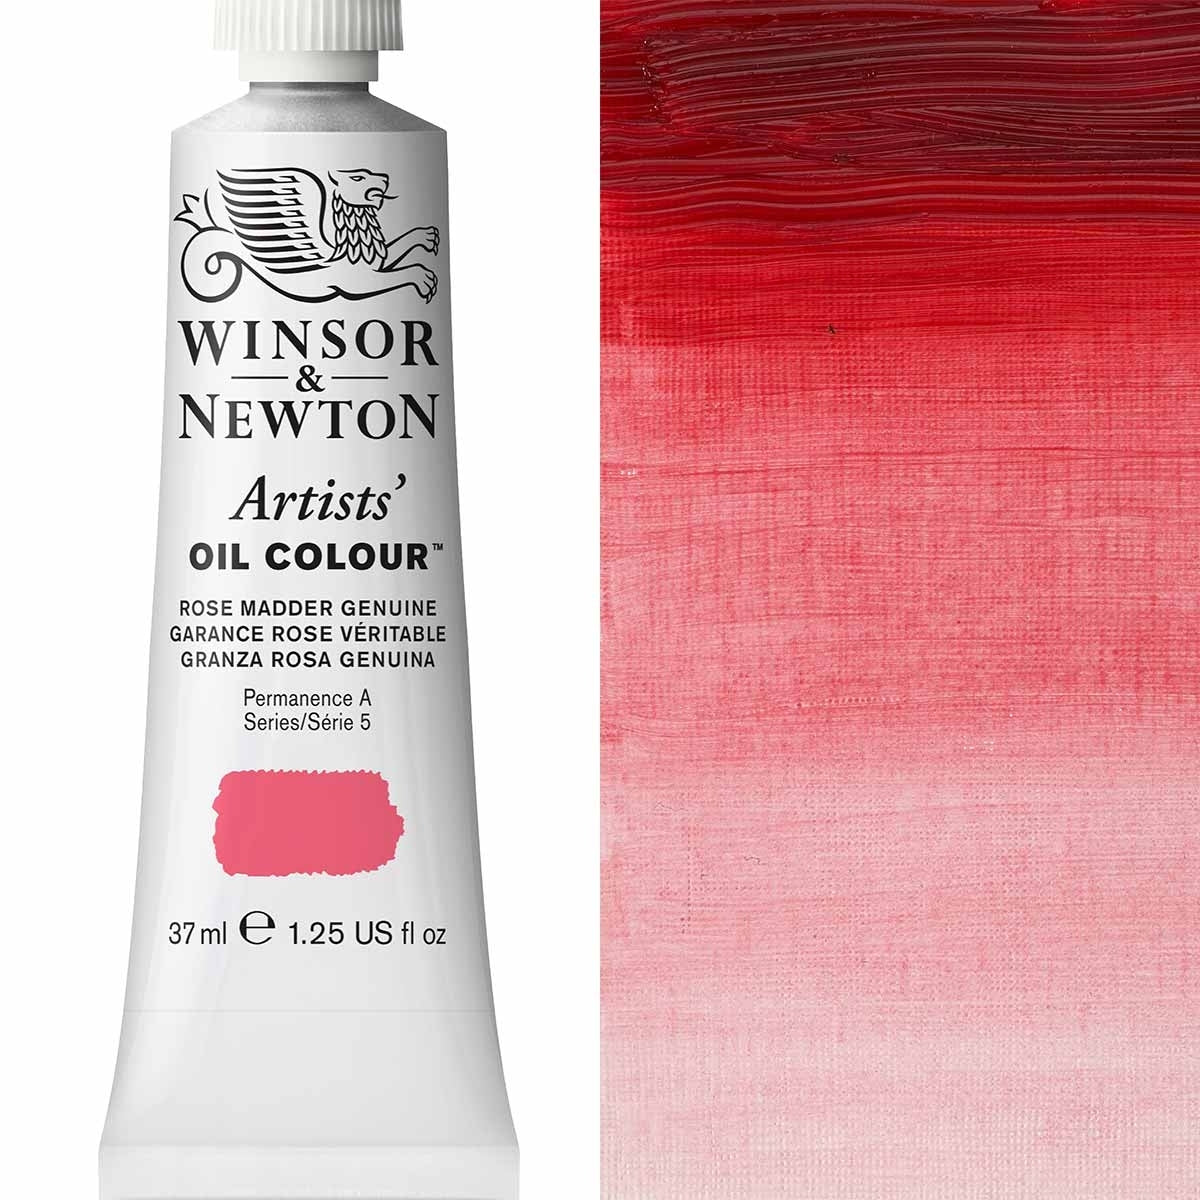 Winsor and Newton - Artists' Oil Colour - 37ml - Rose Madder Genuine